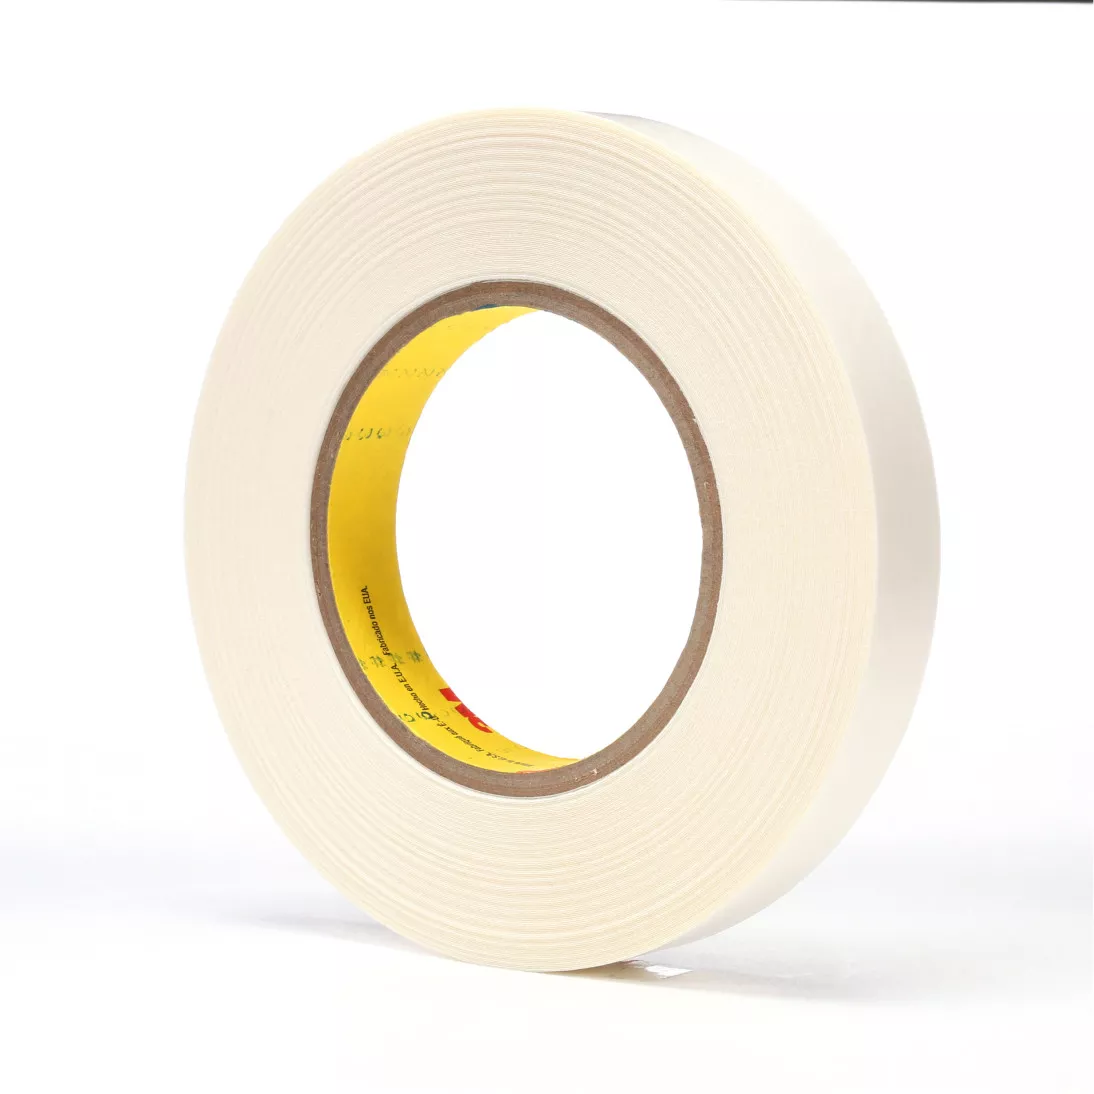 3M™ Double Coated Tape 9579, White, 3/4 in x 36 yd, 9 mil, 48 rolls per
case